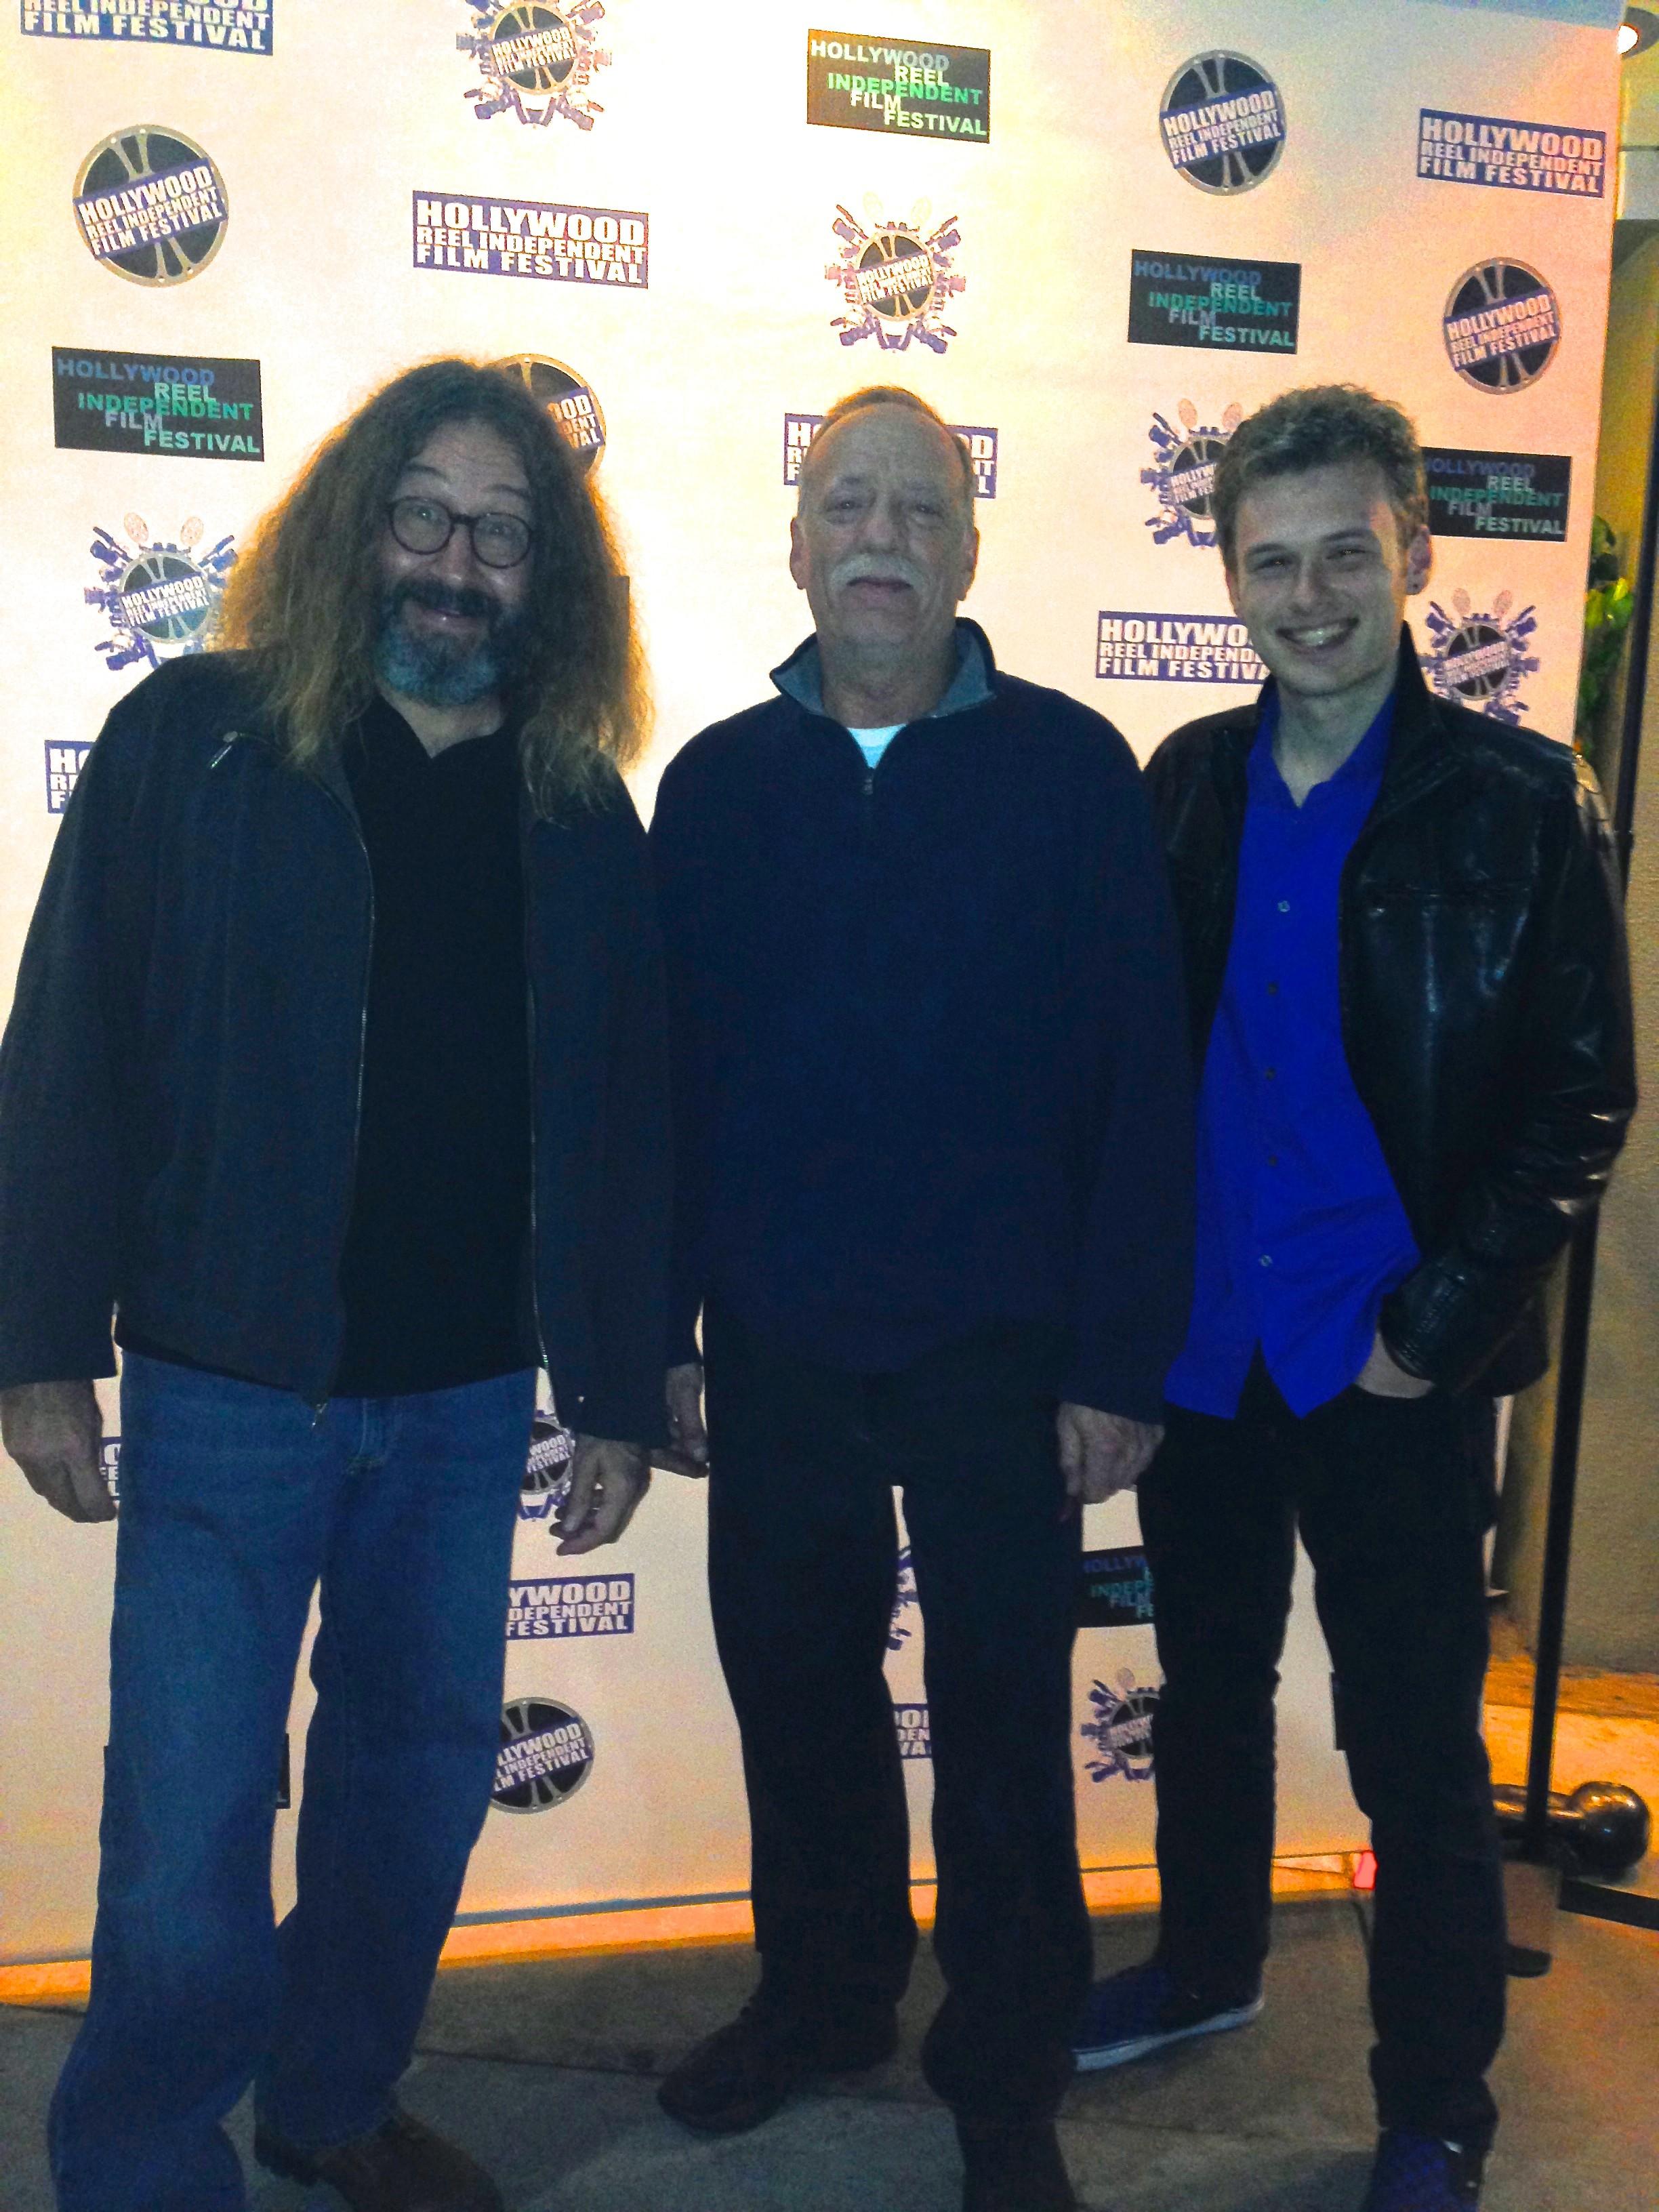 Dan Kneece, Steve Mann and Tyler Nicholas at Hollywood Reel Film Festival for Courting Chaos (2014)